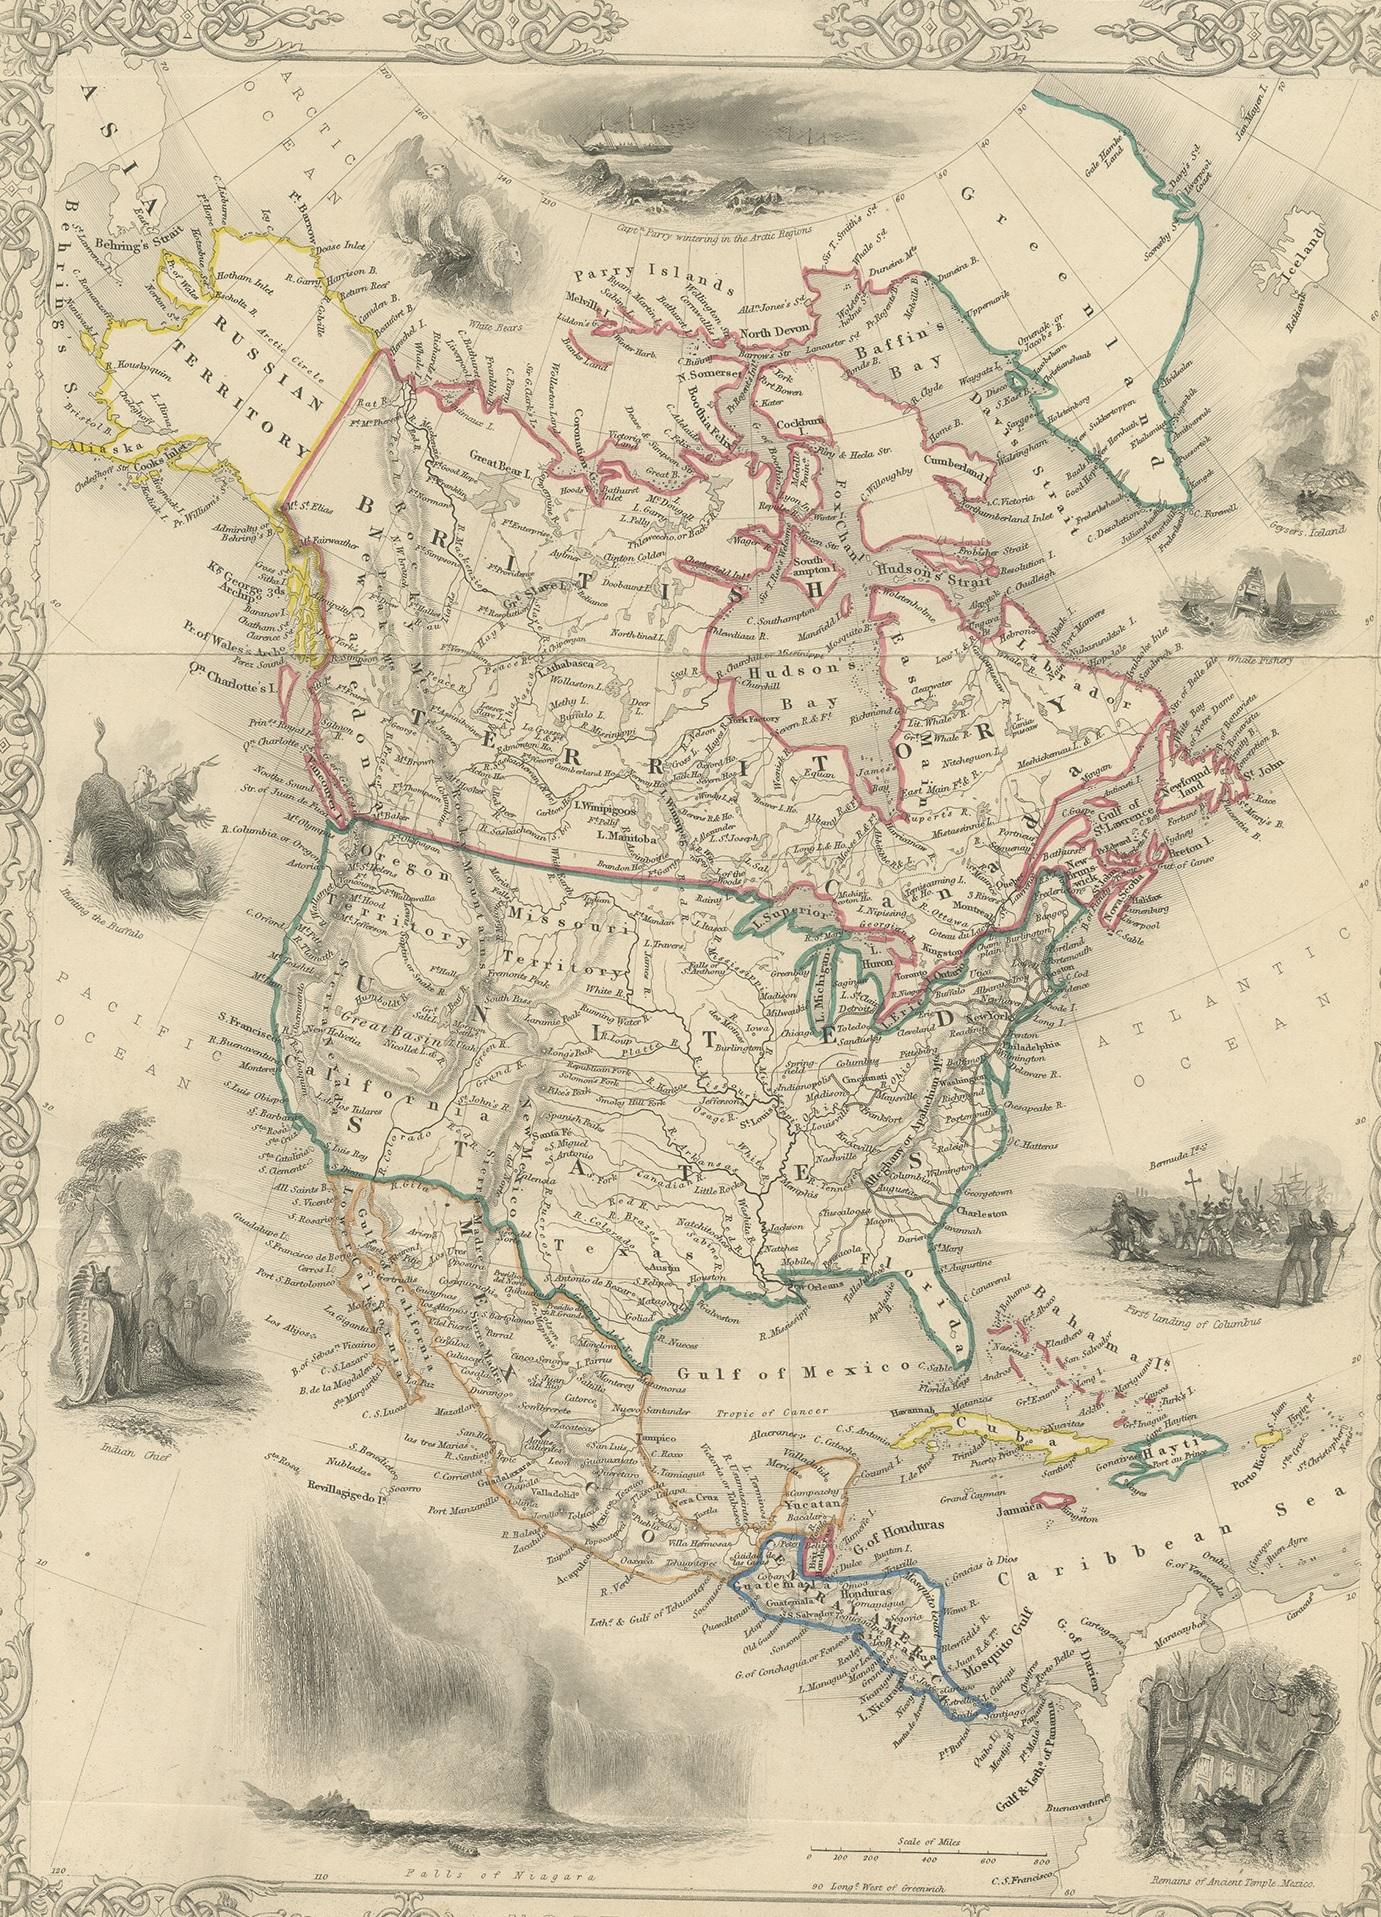 Steel engraving of North America with original outline color. With decorative vignettes including White Bears, Capt. Parry Wintering in the Artic Regions, Whale Fishery, First Landing of Columbus, Remains of Ancient Temple, Mexico, Falls of Niagara,